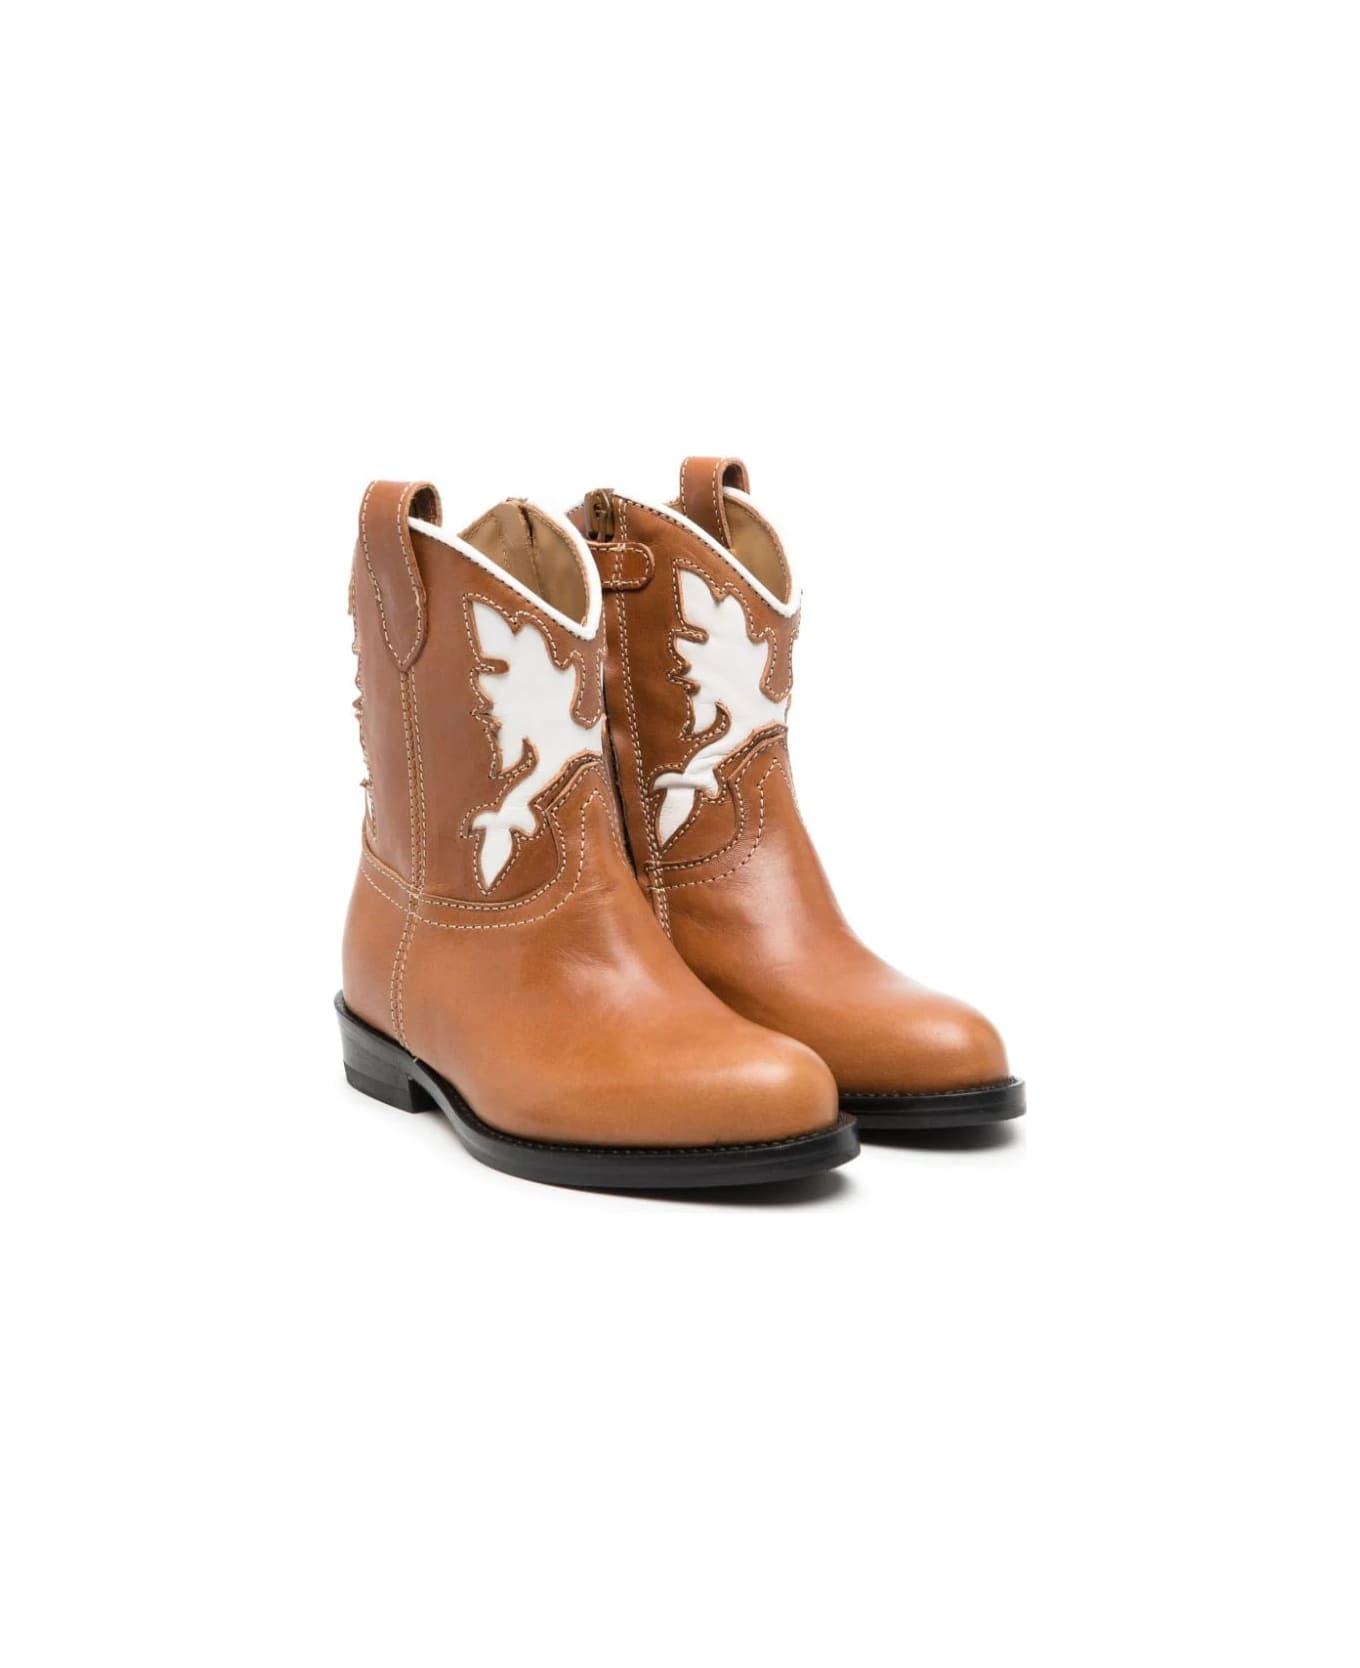 Gallucci Western Boots With Embroidery - Brown シューズ